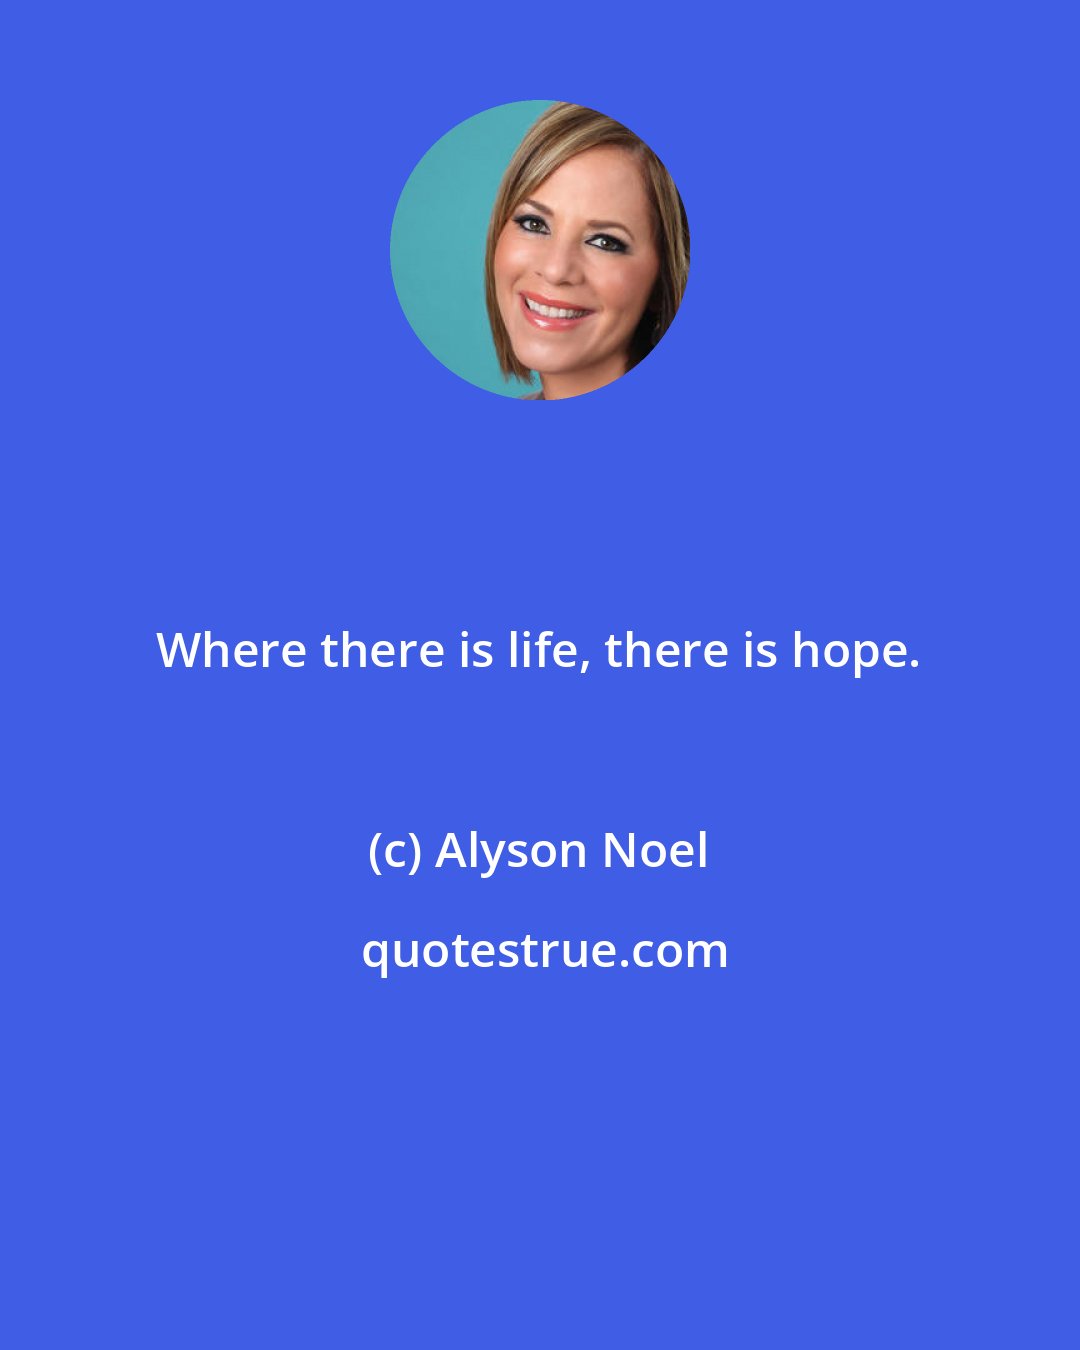 Alyson Noel: Where there is life, there is hope.